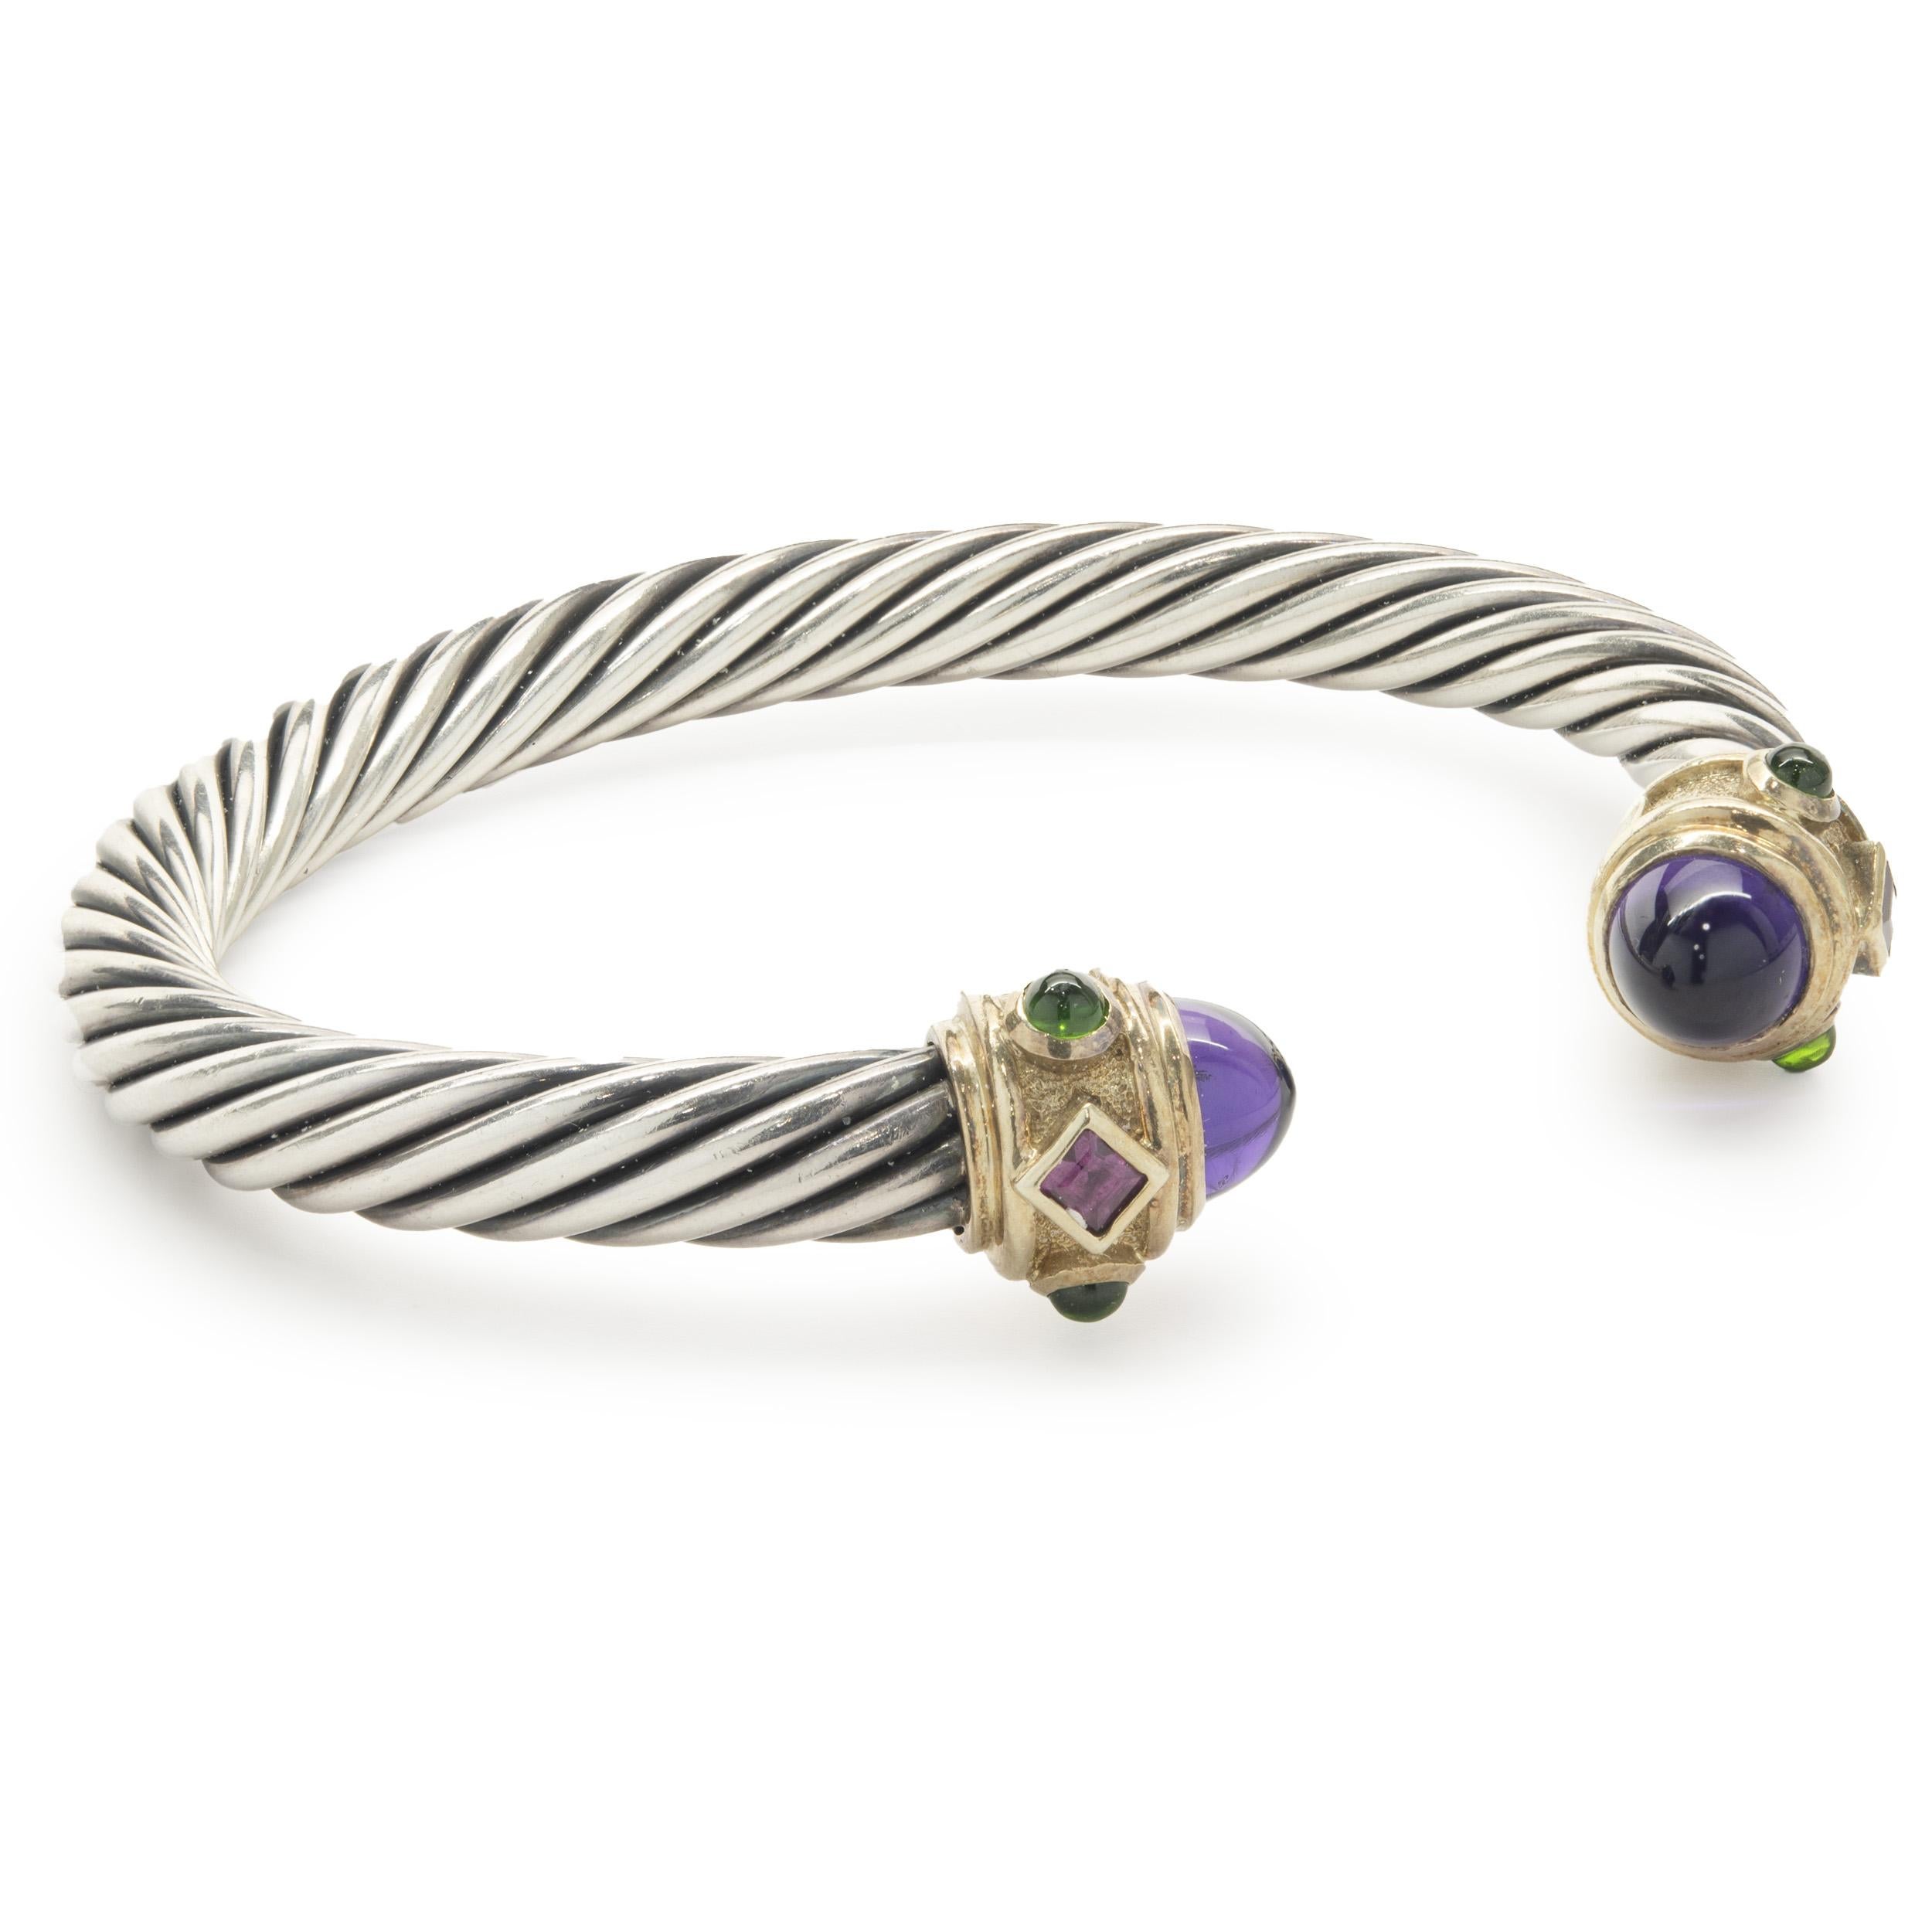 Designer: David Yurman
Material: 14K yellow gold & sterling silver
Dimensions: bracelet will fit up to a 7-inch wrist
Weight: 46.23 grams